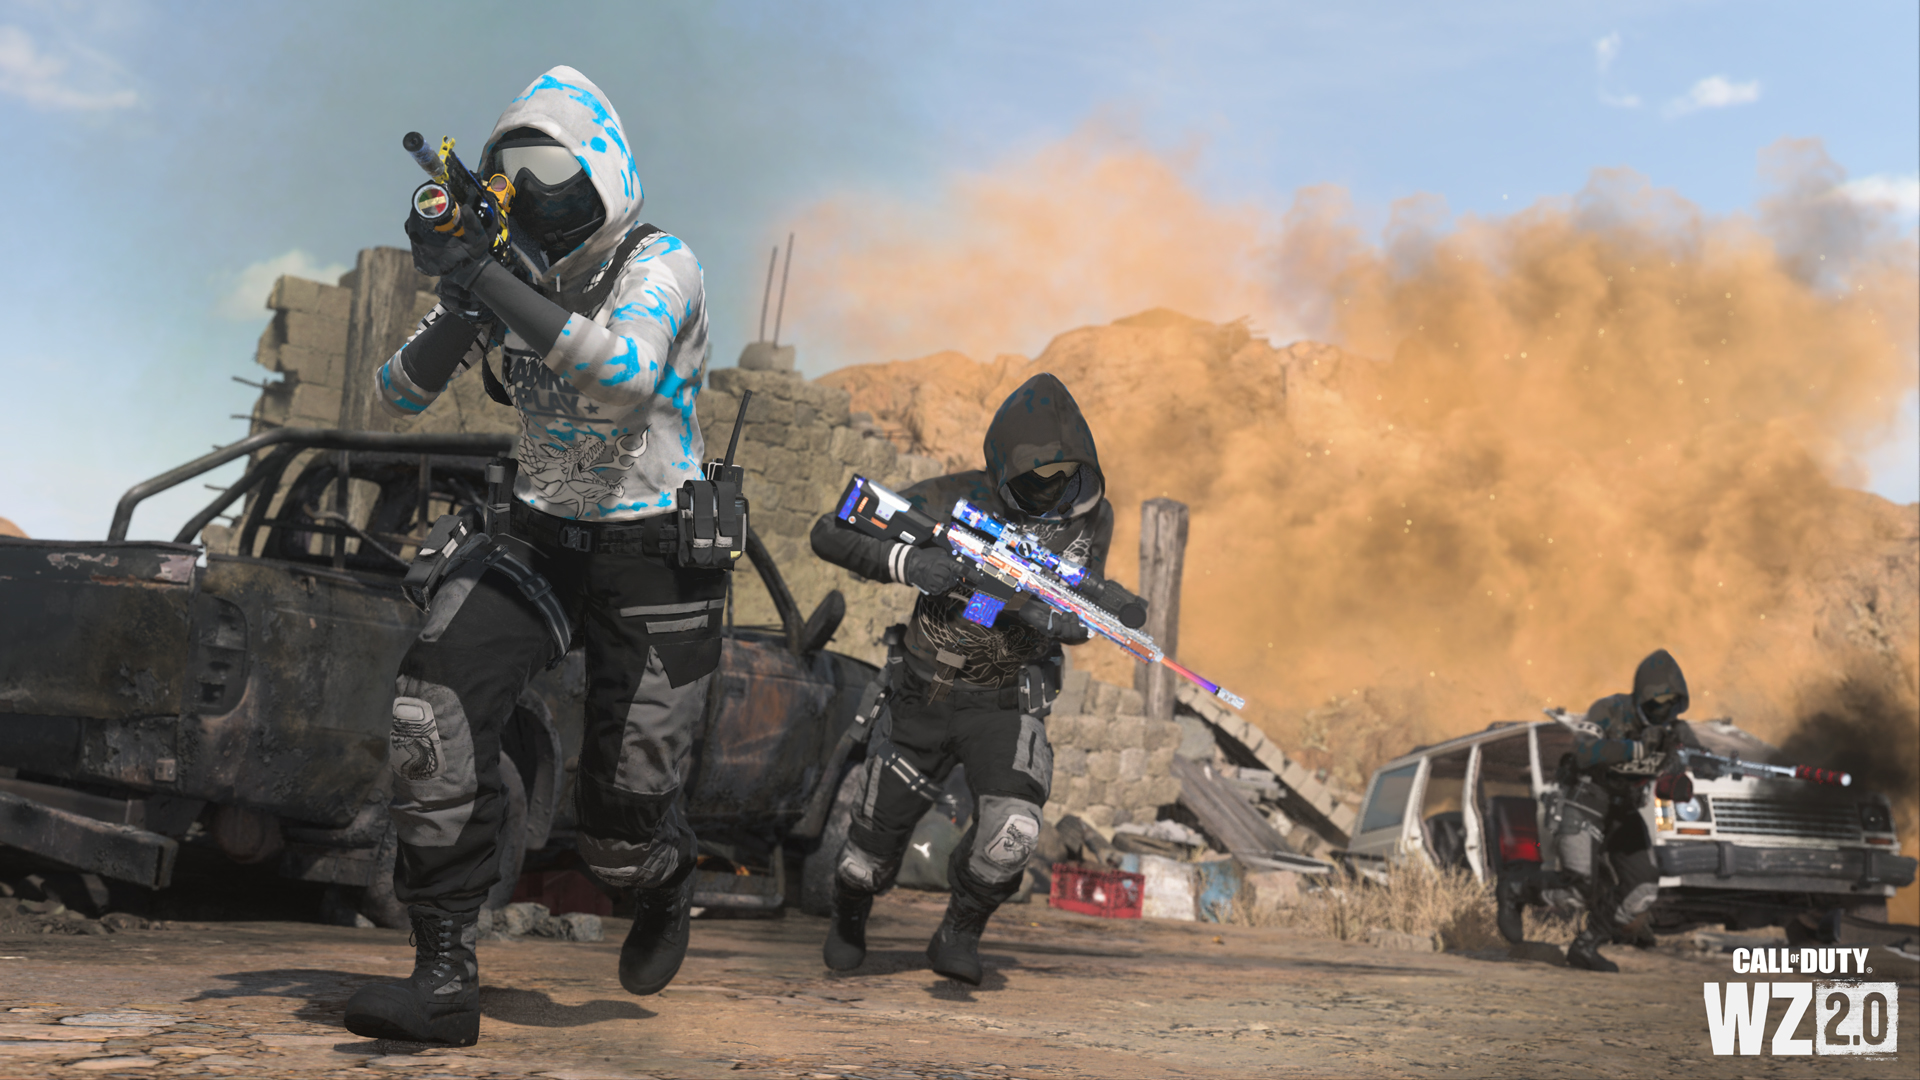 Warzone Mobile: Release Date, Beta, Details, and More Information